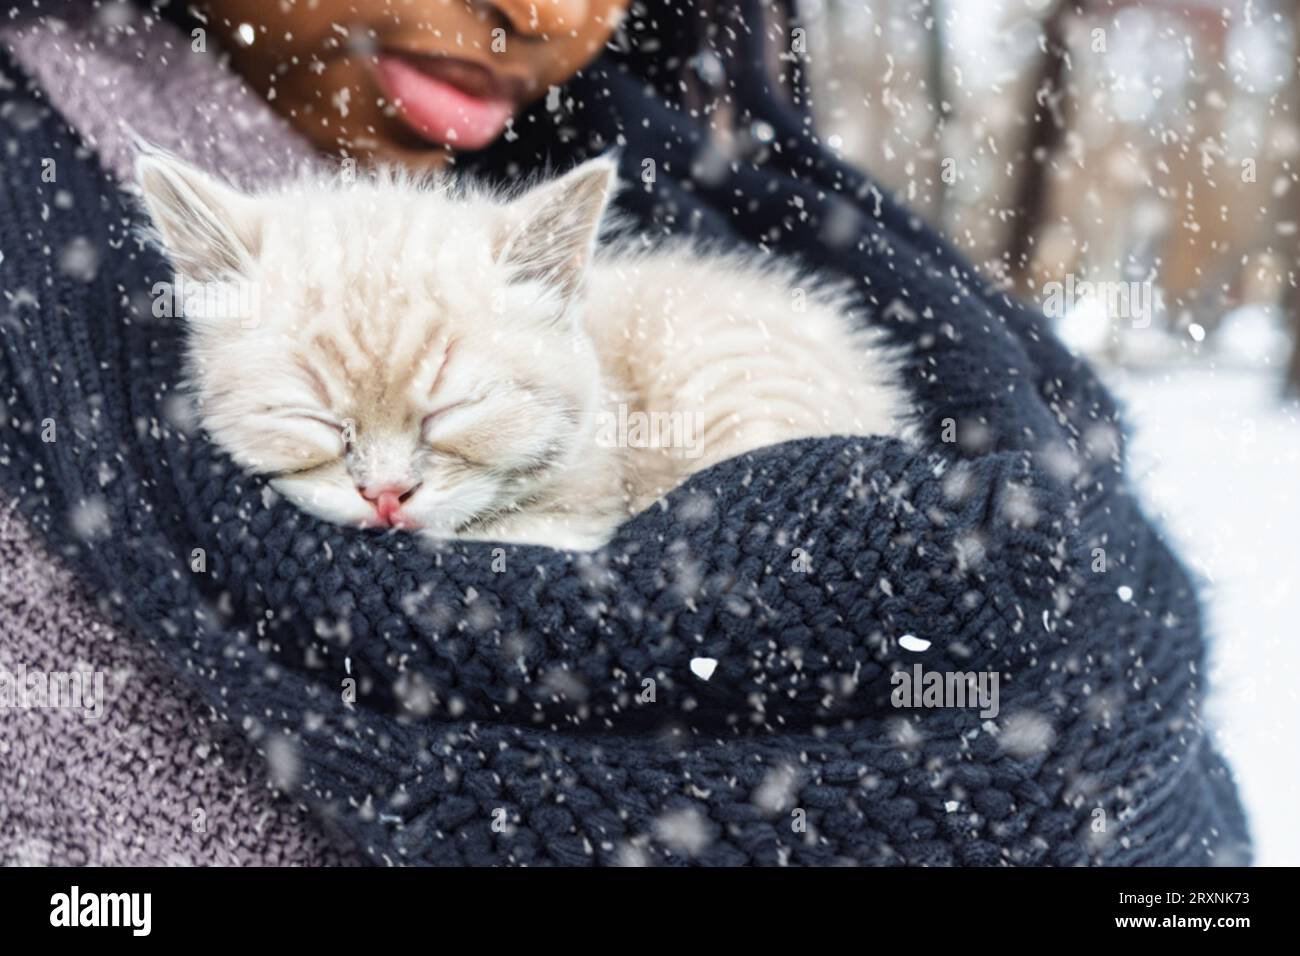 A kitten sleeps in a person's arms. A cat sleeps in human arms, wrapped in a sweater in a winter park. Copy space Stock Photo